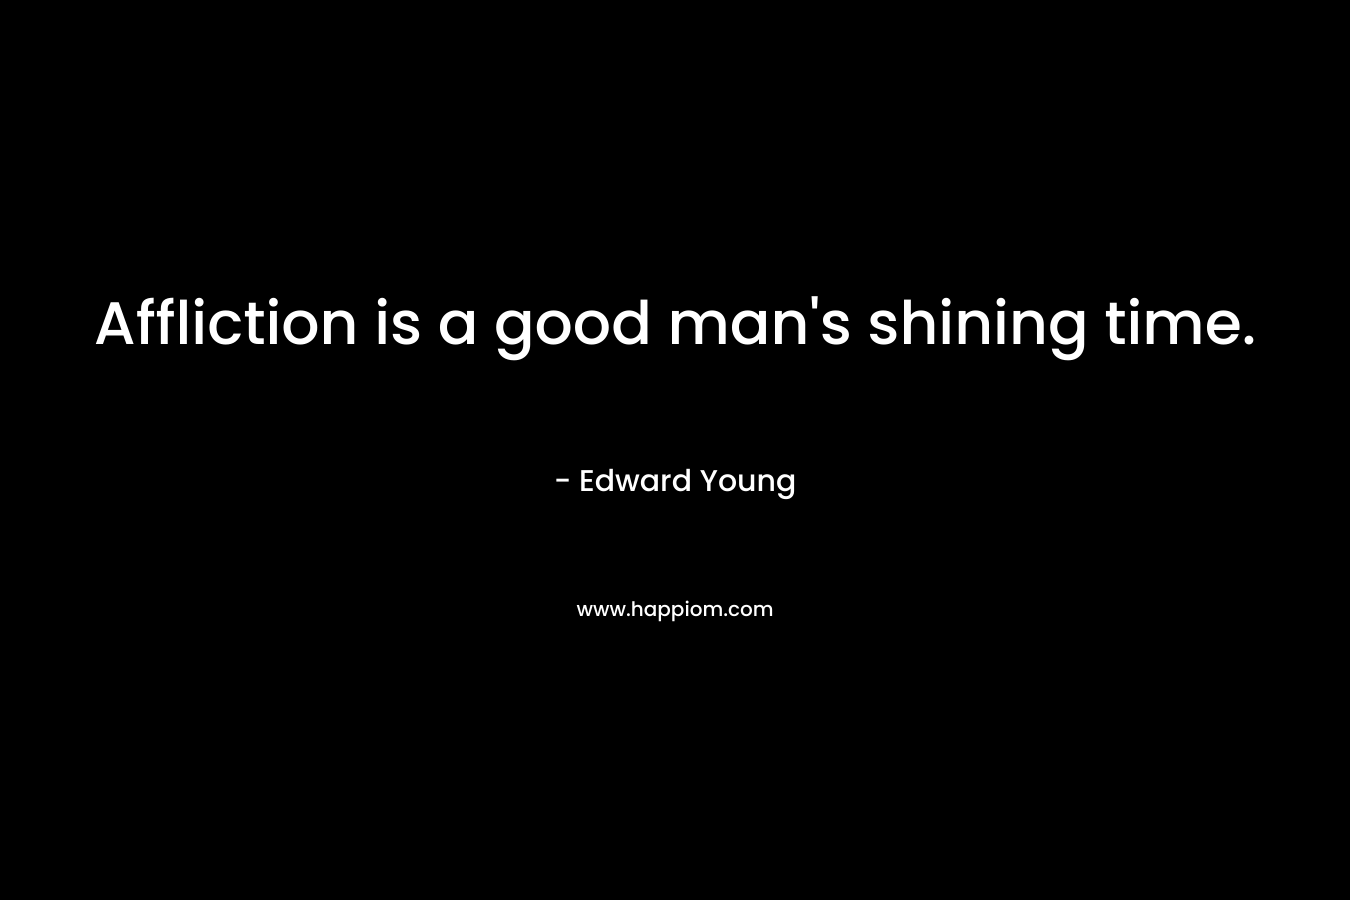 Affliction is a good man’s shining time. – Edward Young